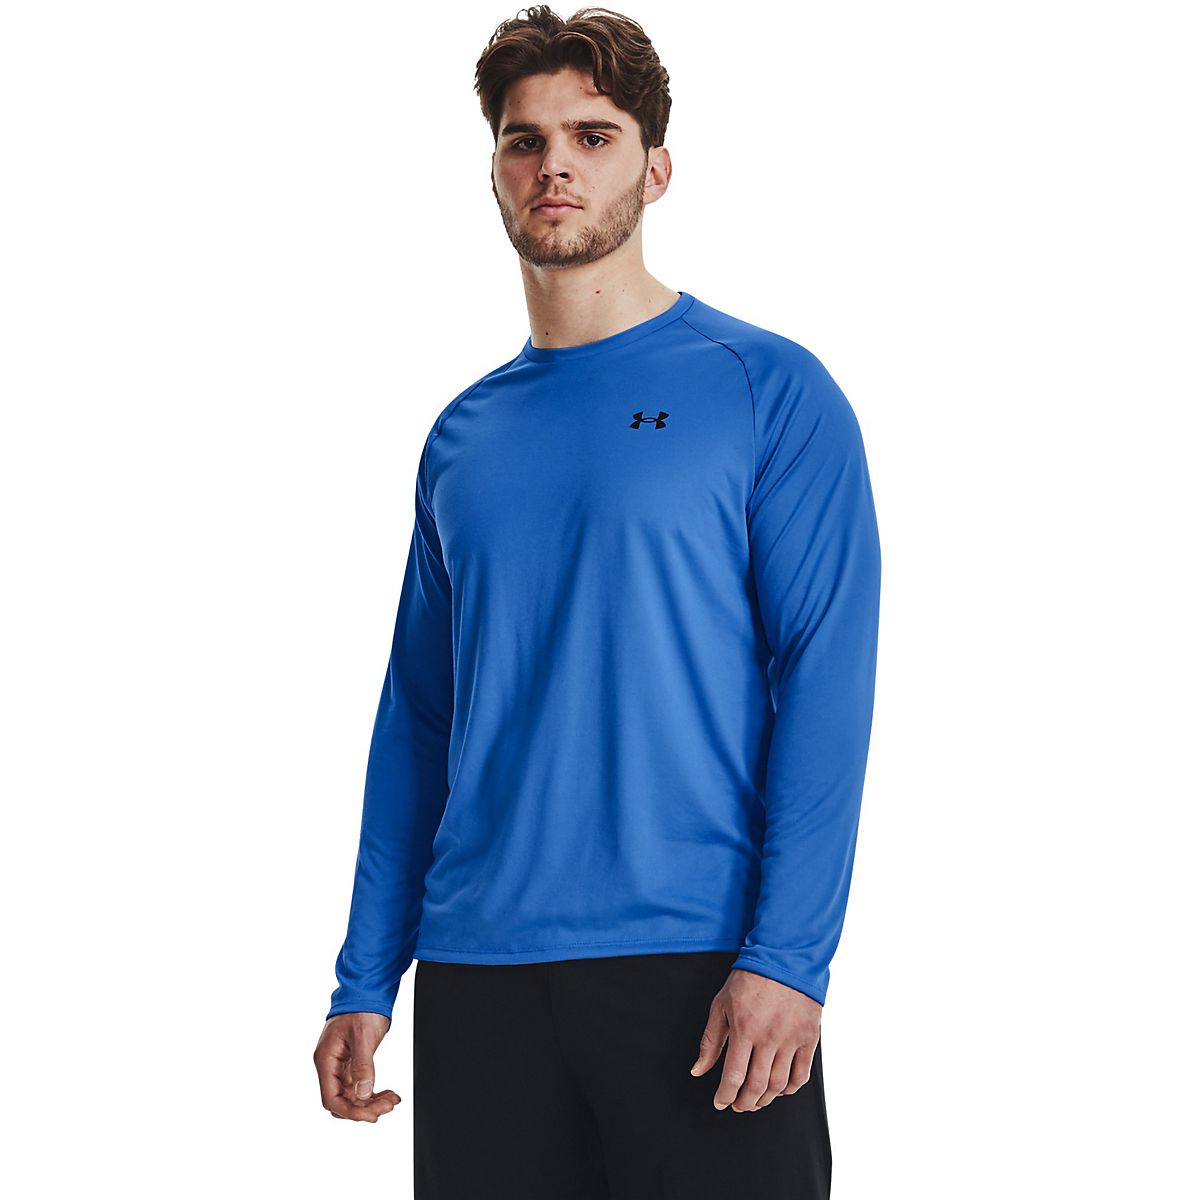 Under Armour Men's Tactical Tech Long Sleeve T-Shirt - Emergency Responder  Products